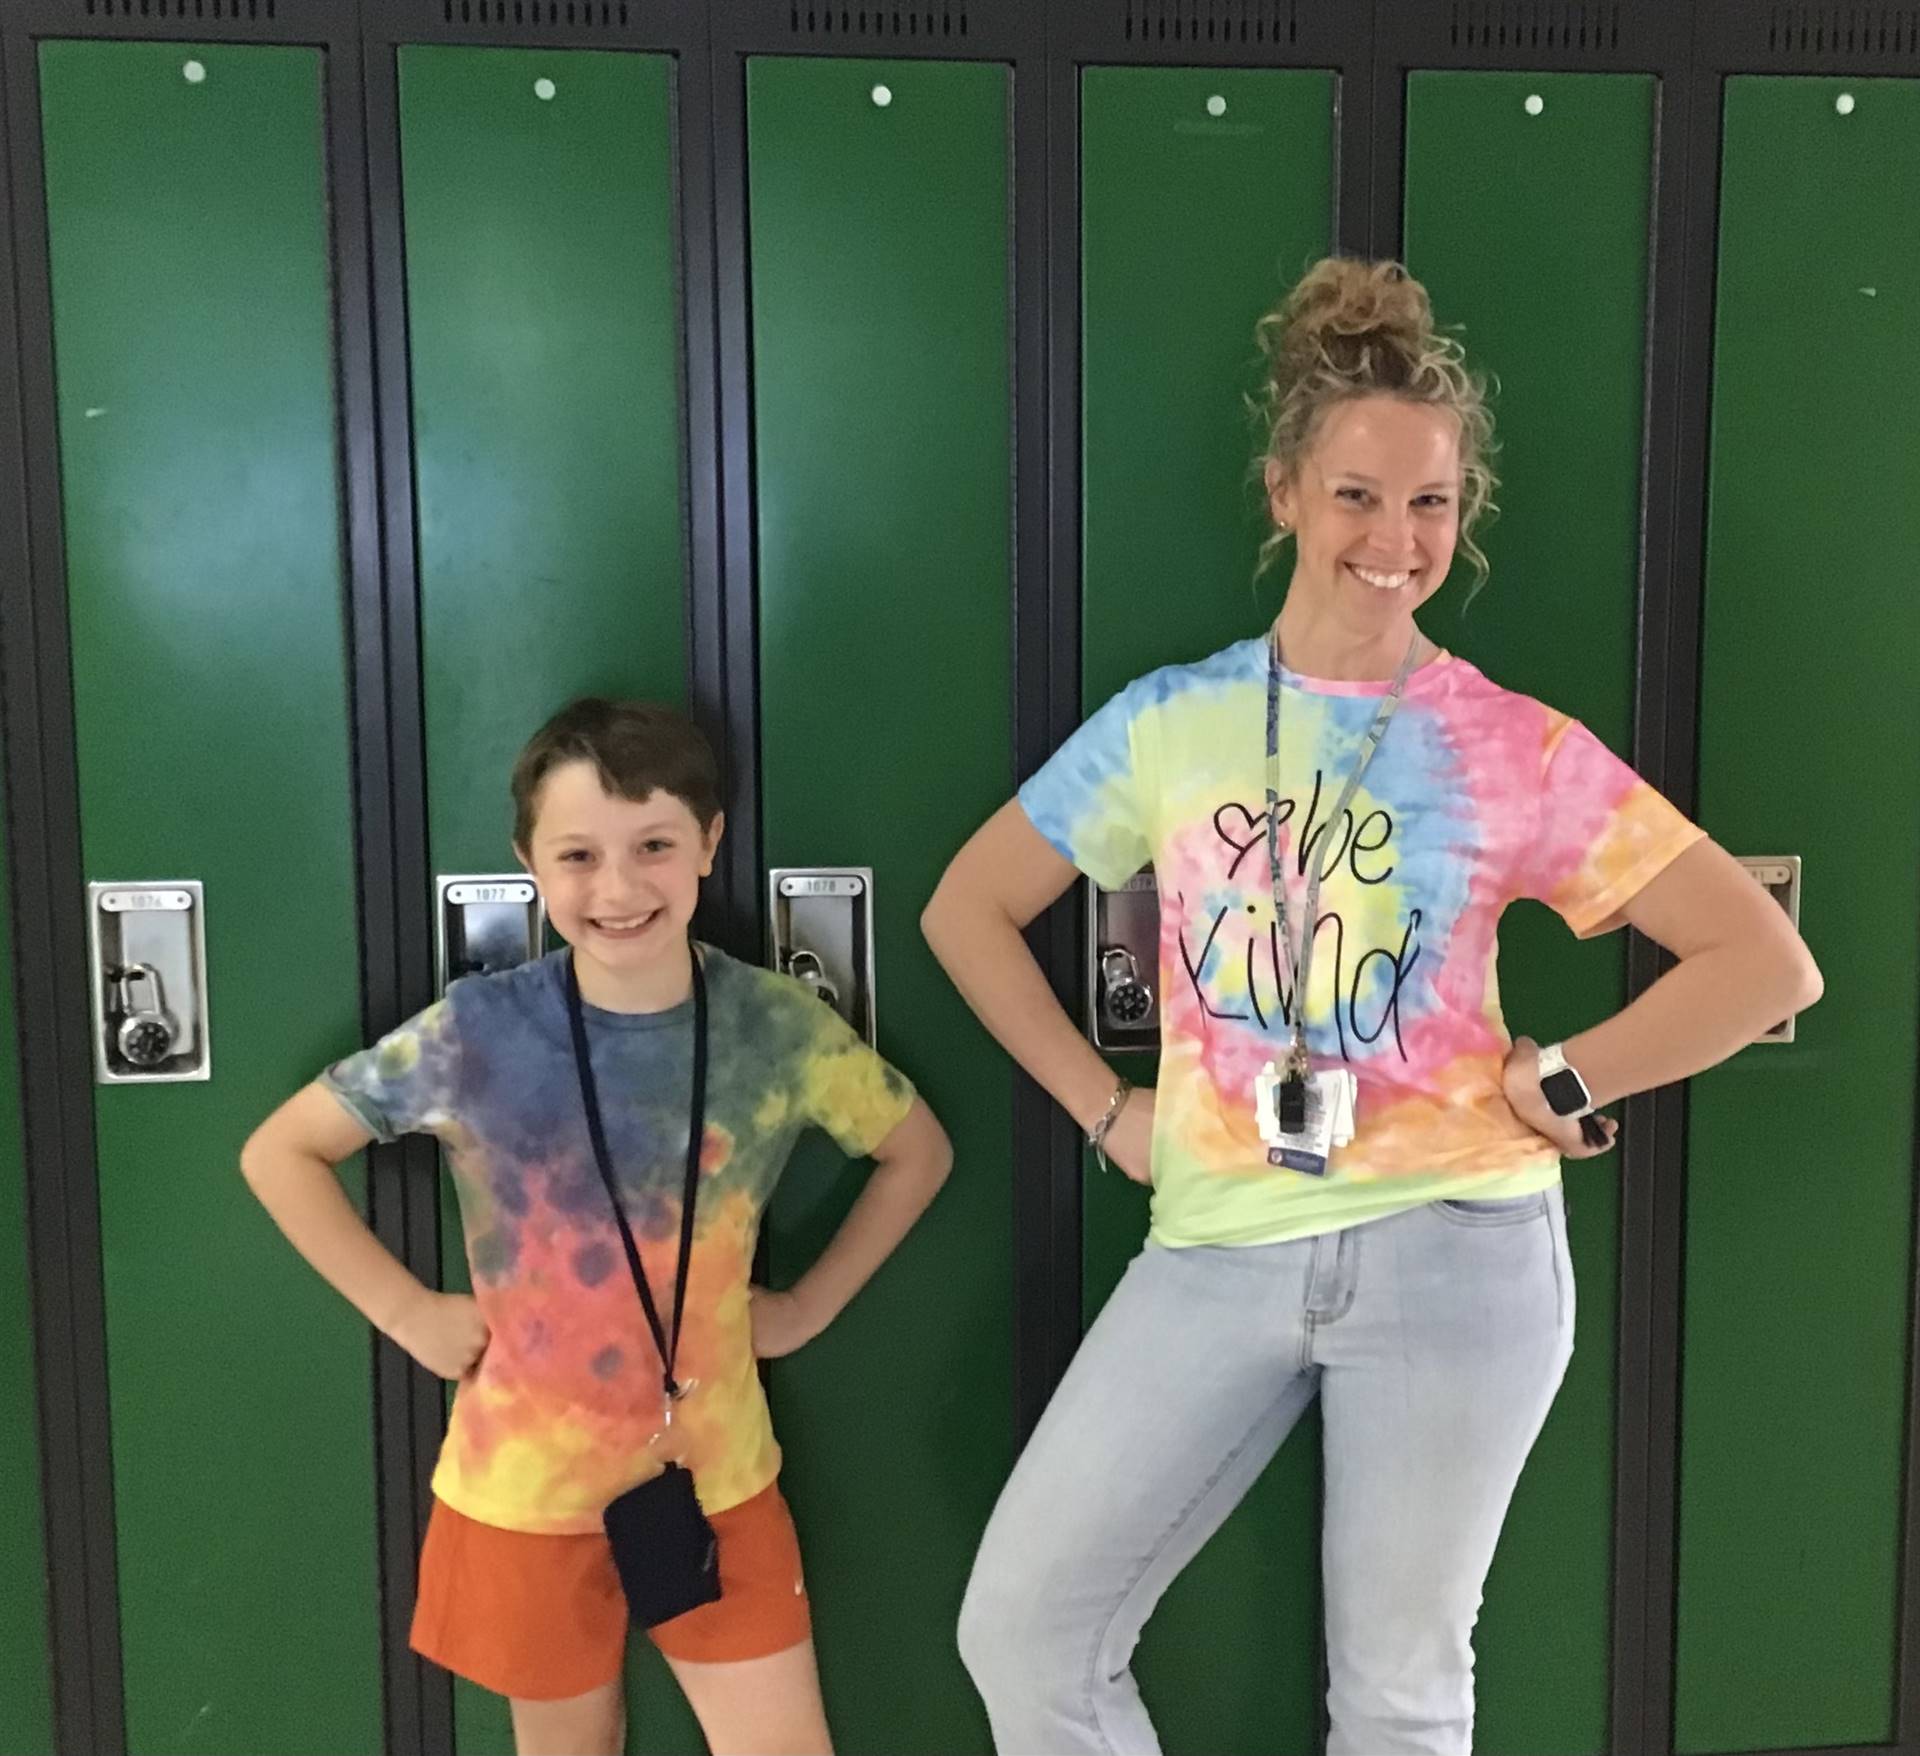 Teacher and student in tie-dye